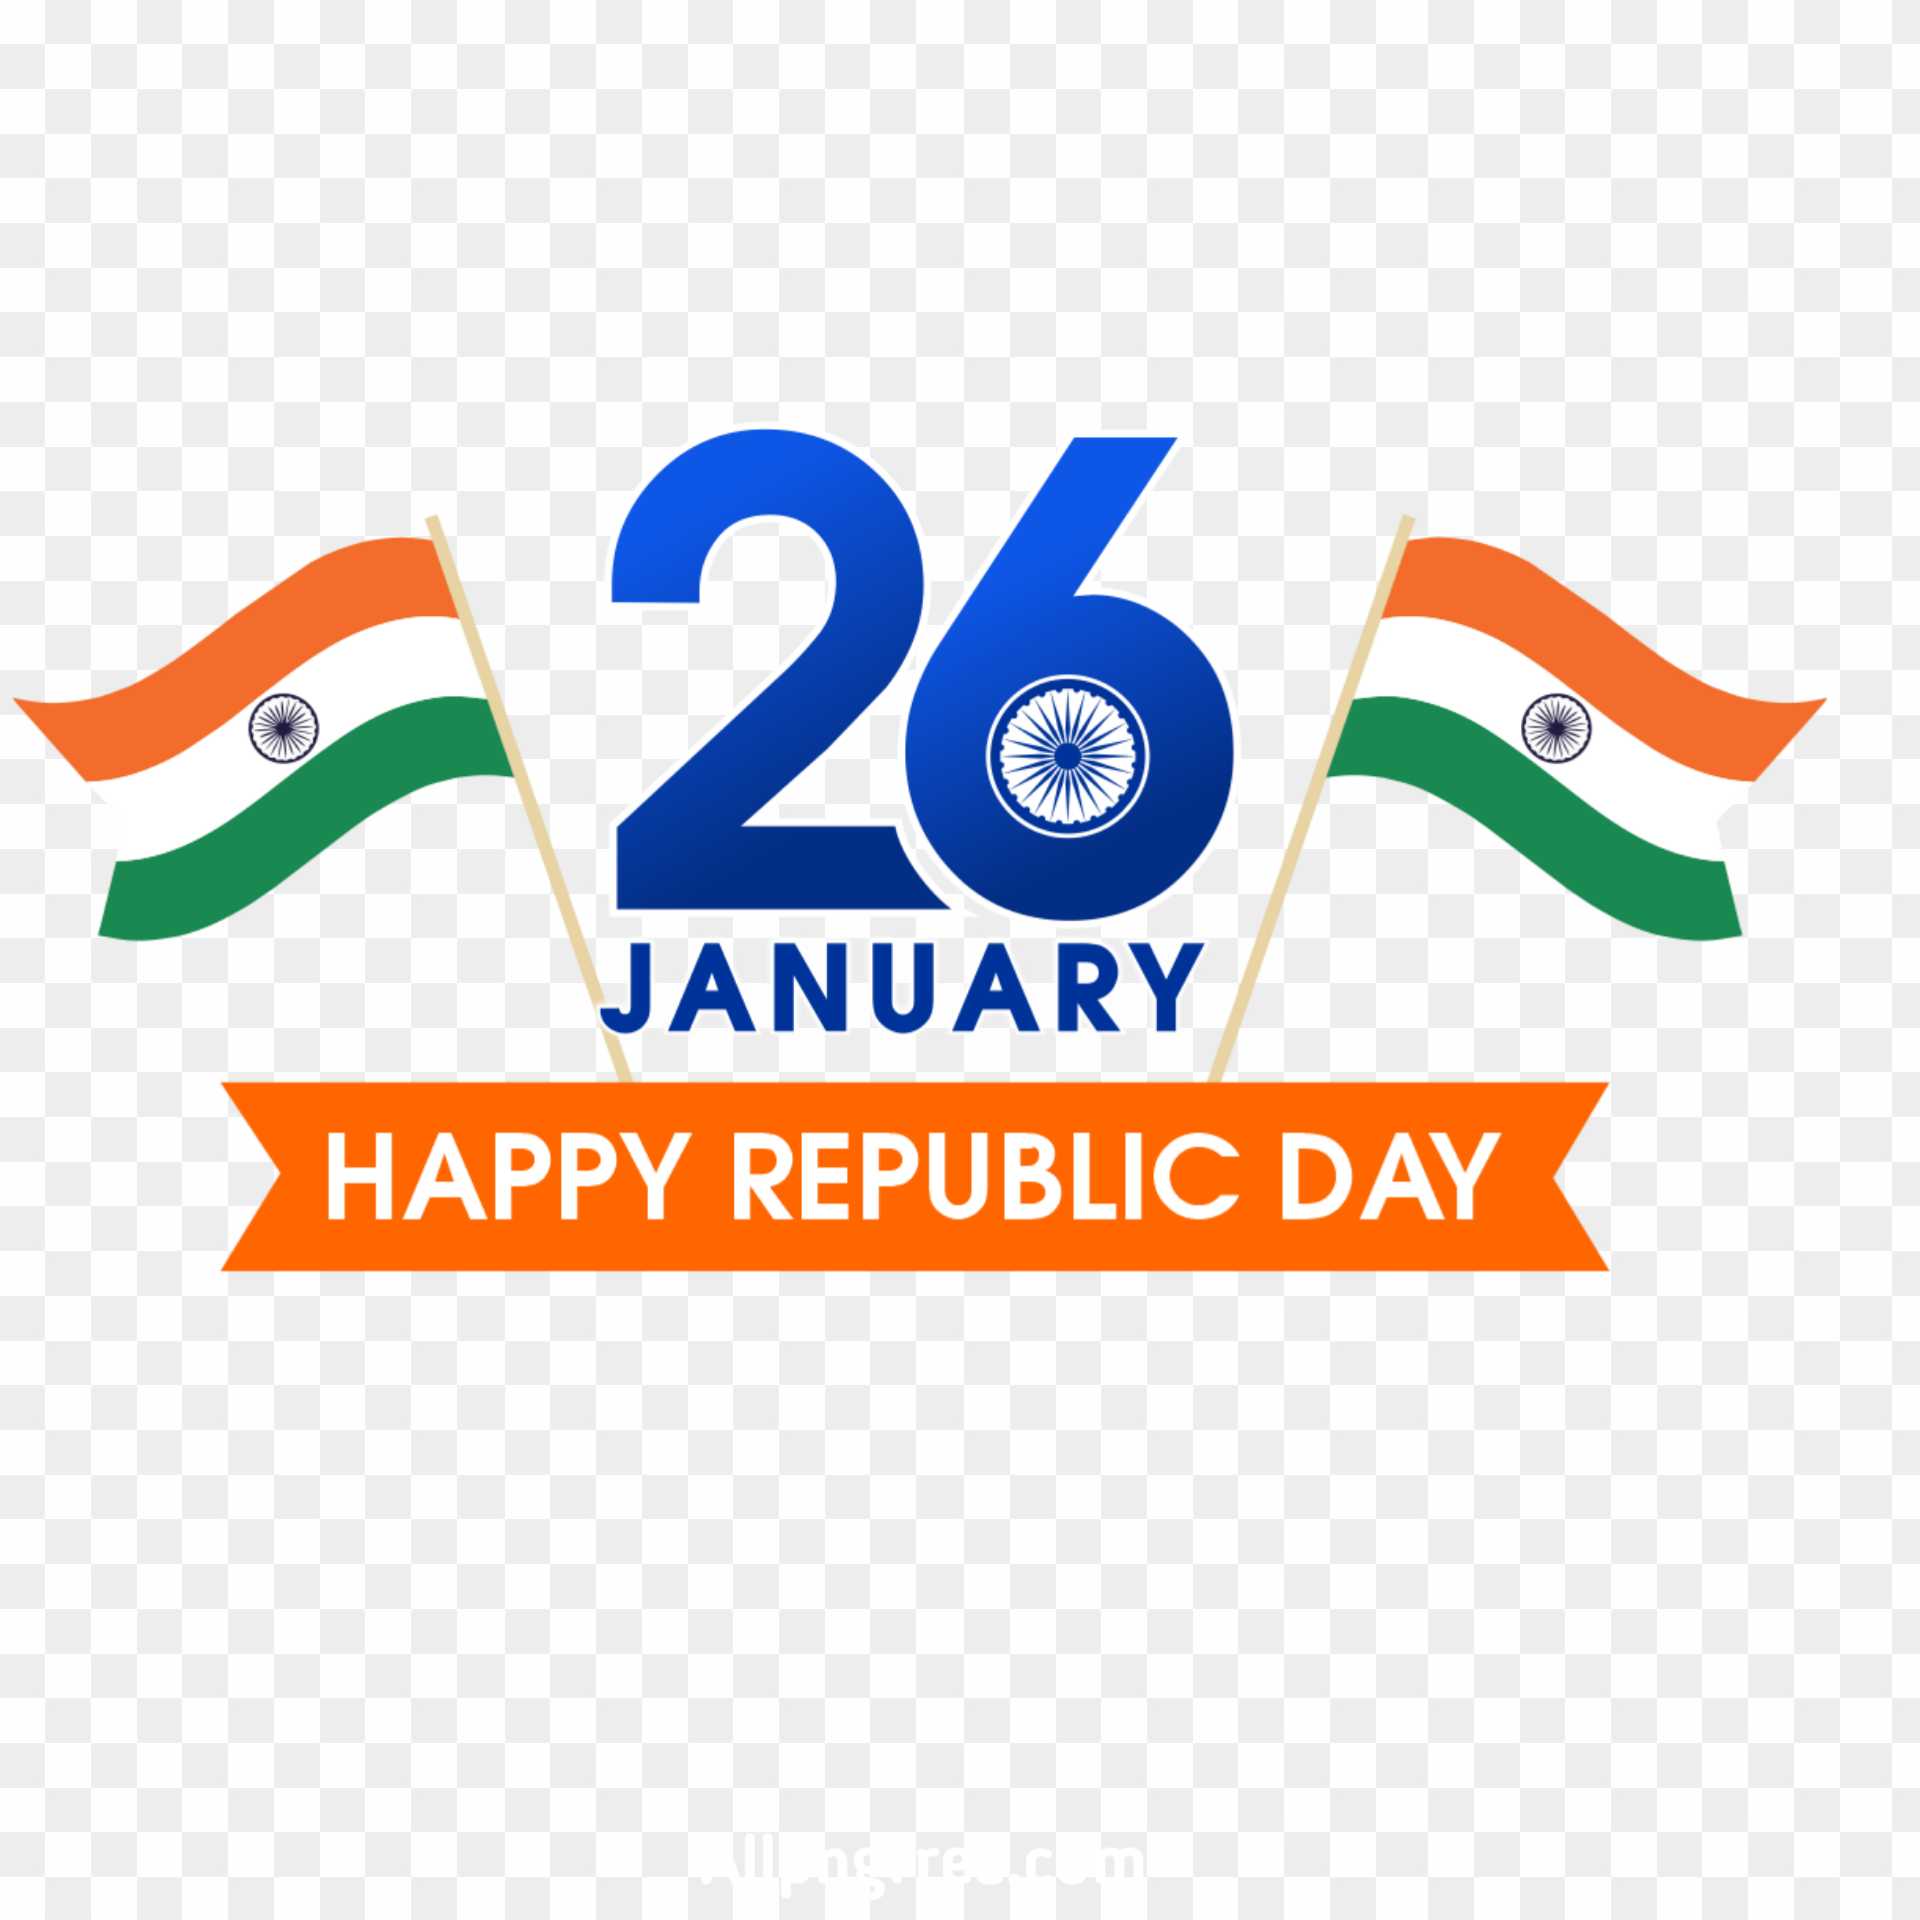 26 January republic day PNG transparent images 